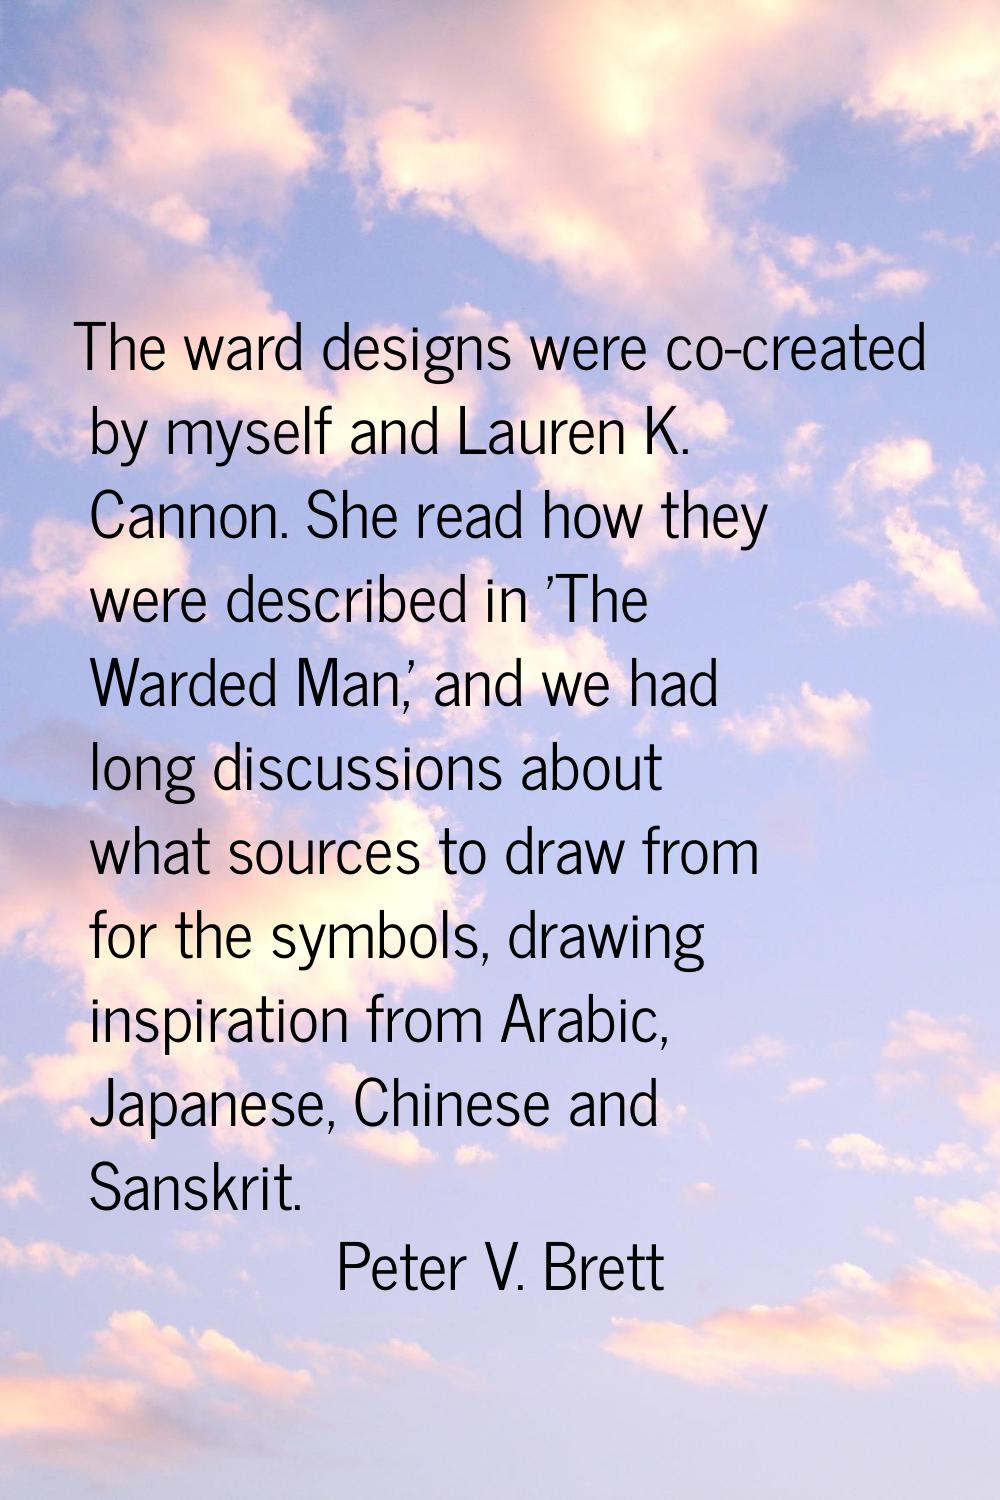 The ward designs were co-created by myself and Lauren K. Cannon. She read how they were described i